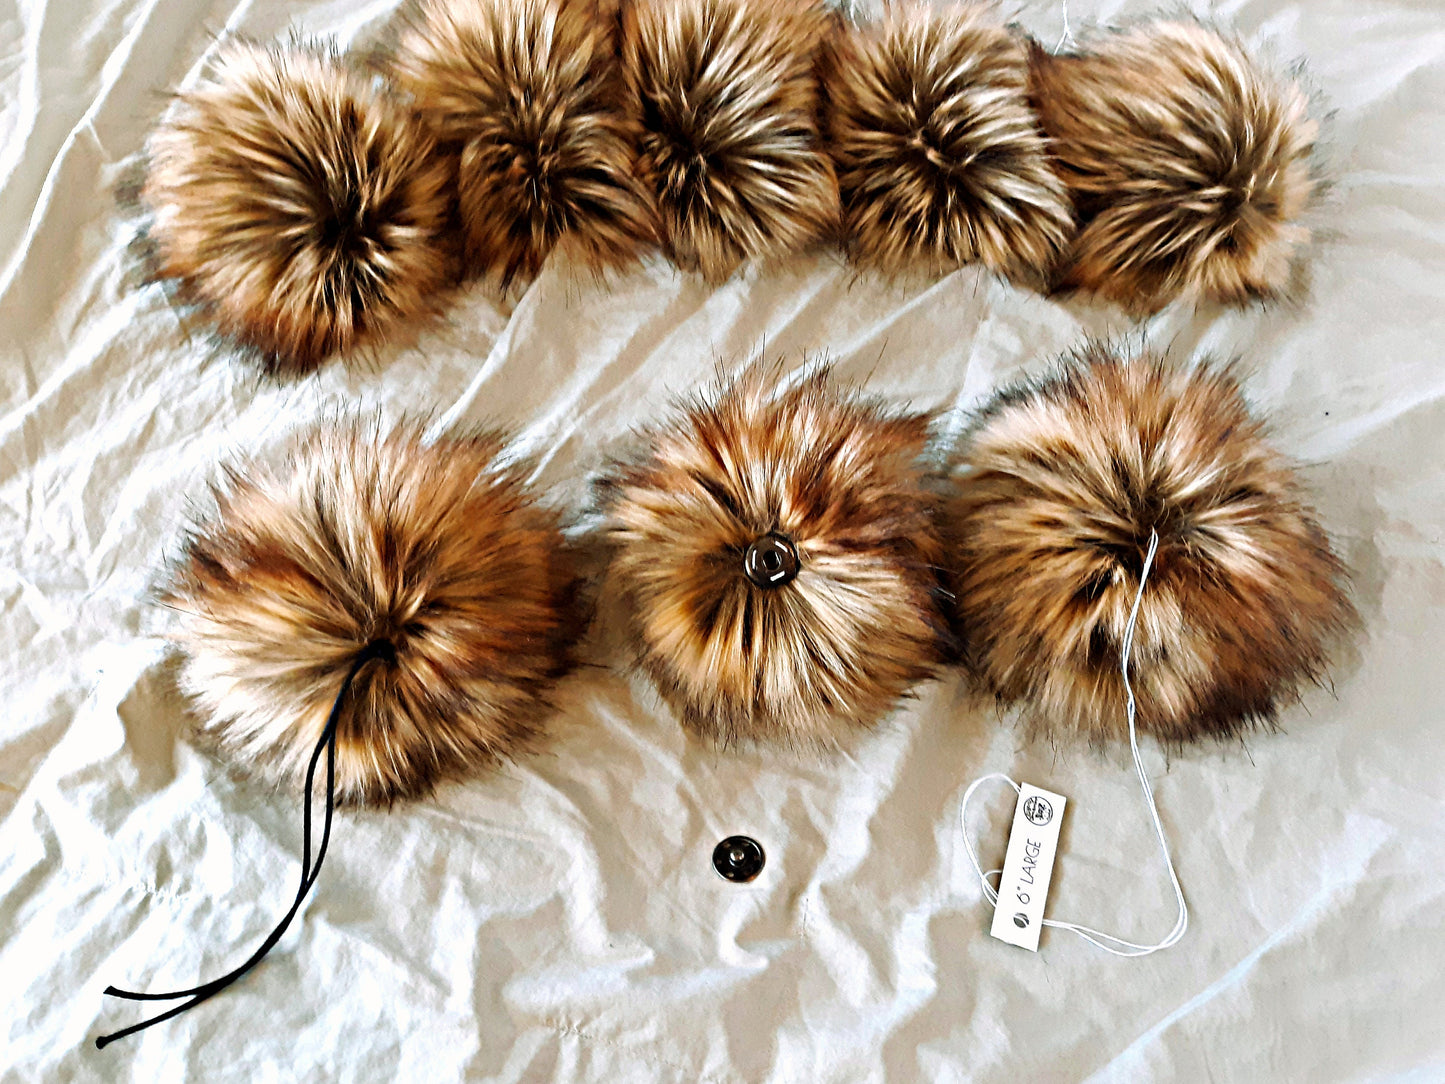 ADD-ON Snaps, Cords, and Elastic to go with Pom orders